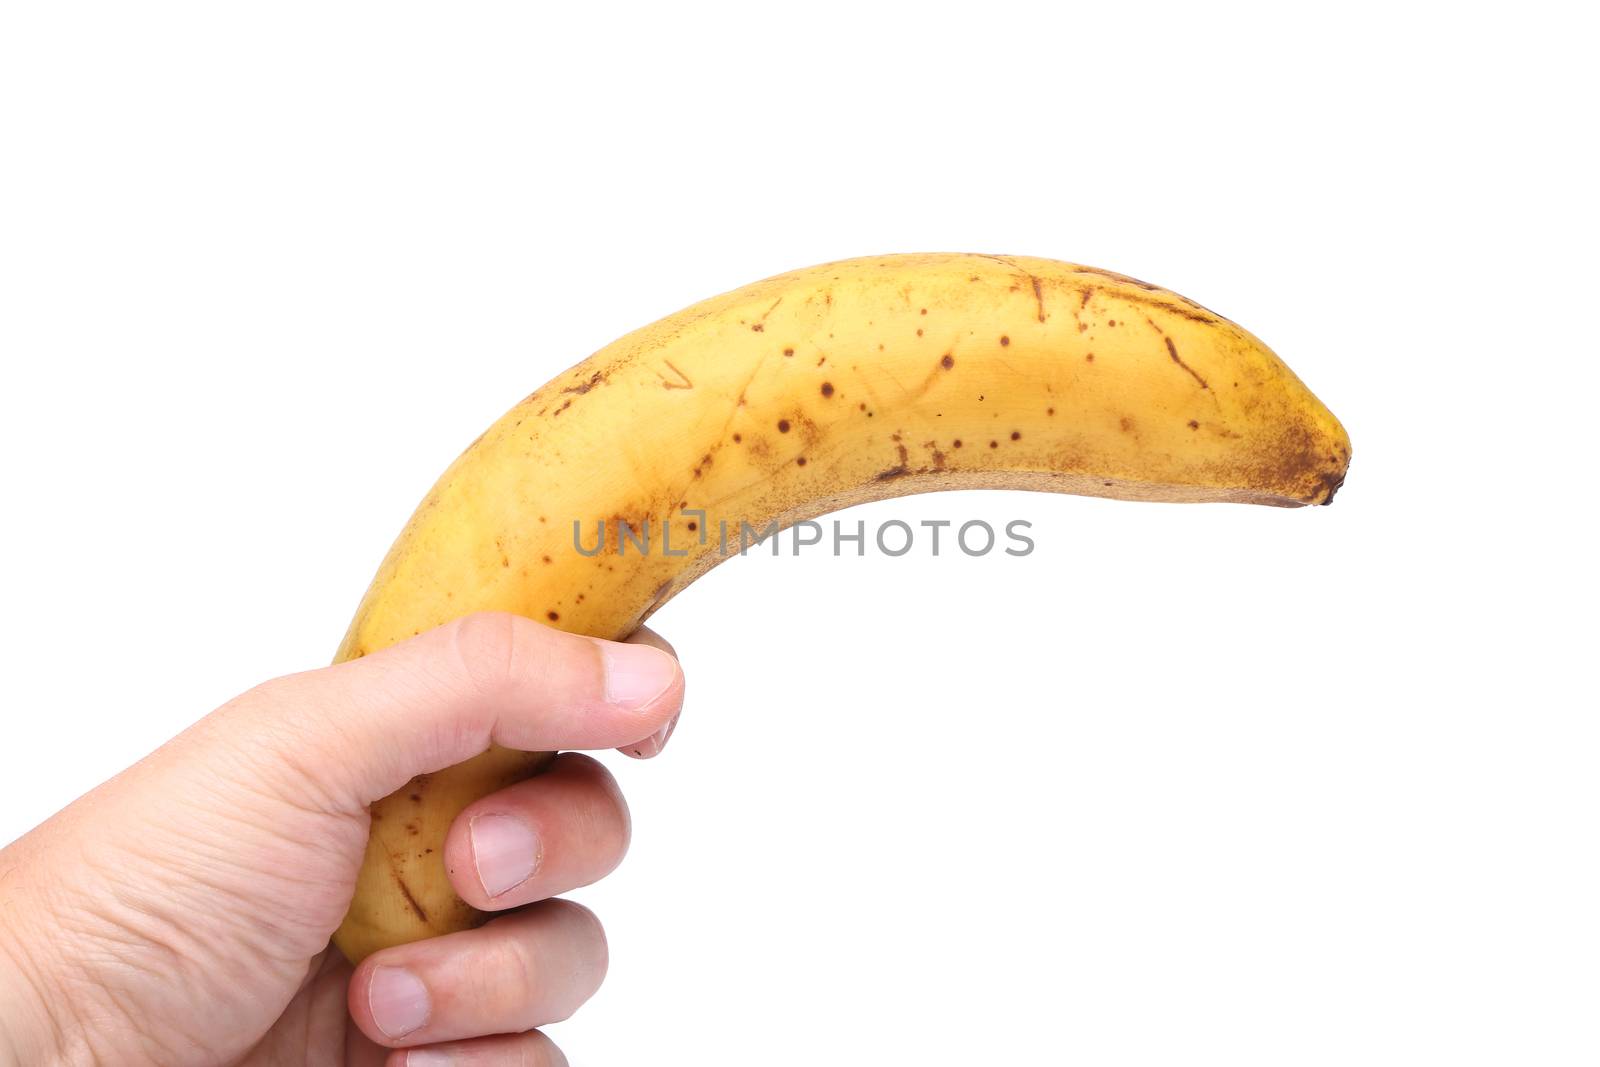 A stale banana in a hand